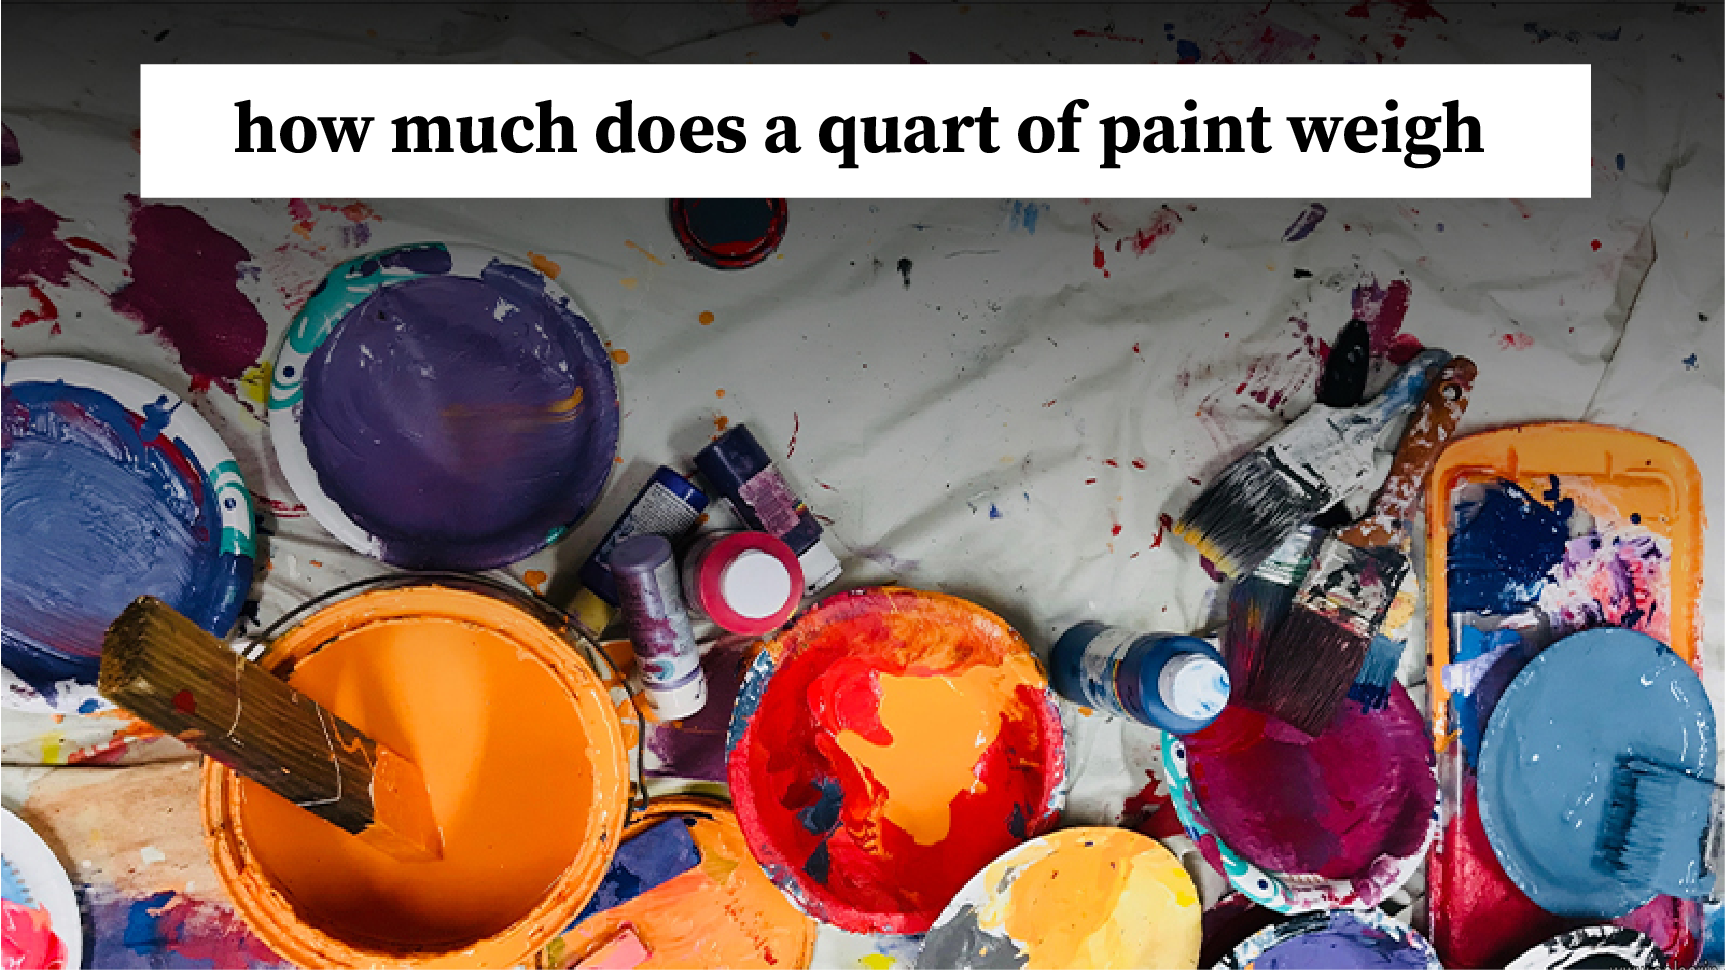 how much does a quart of paint weigh